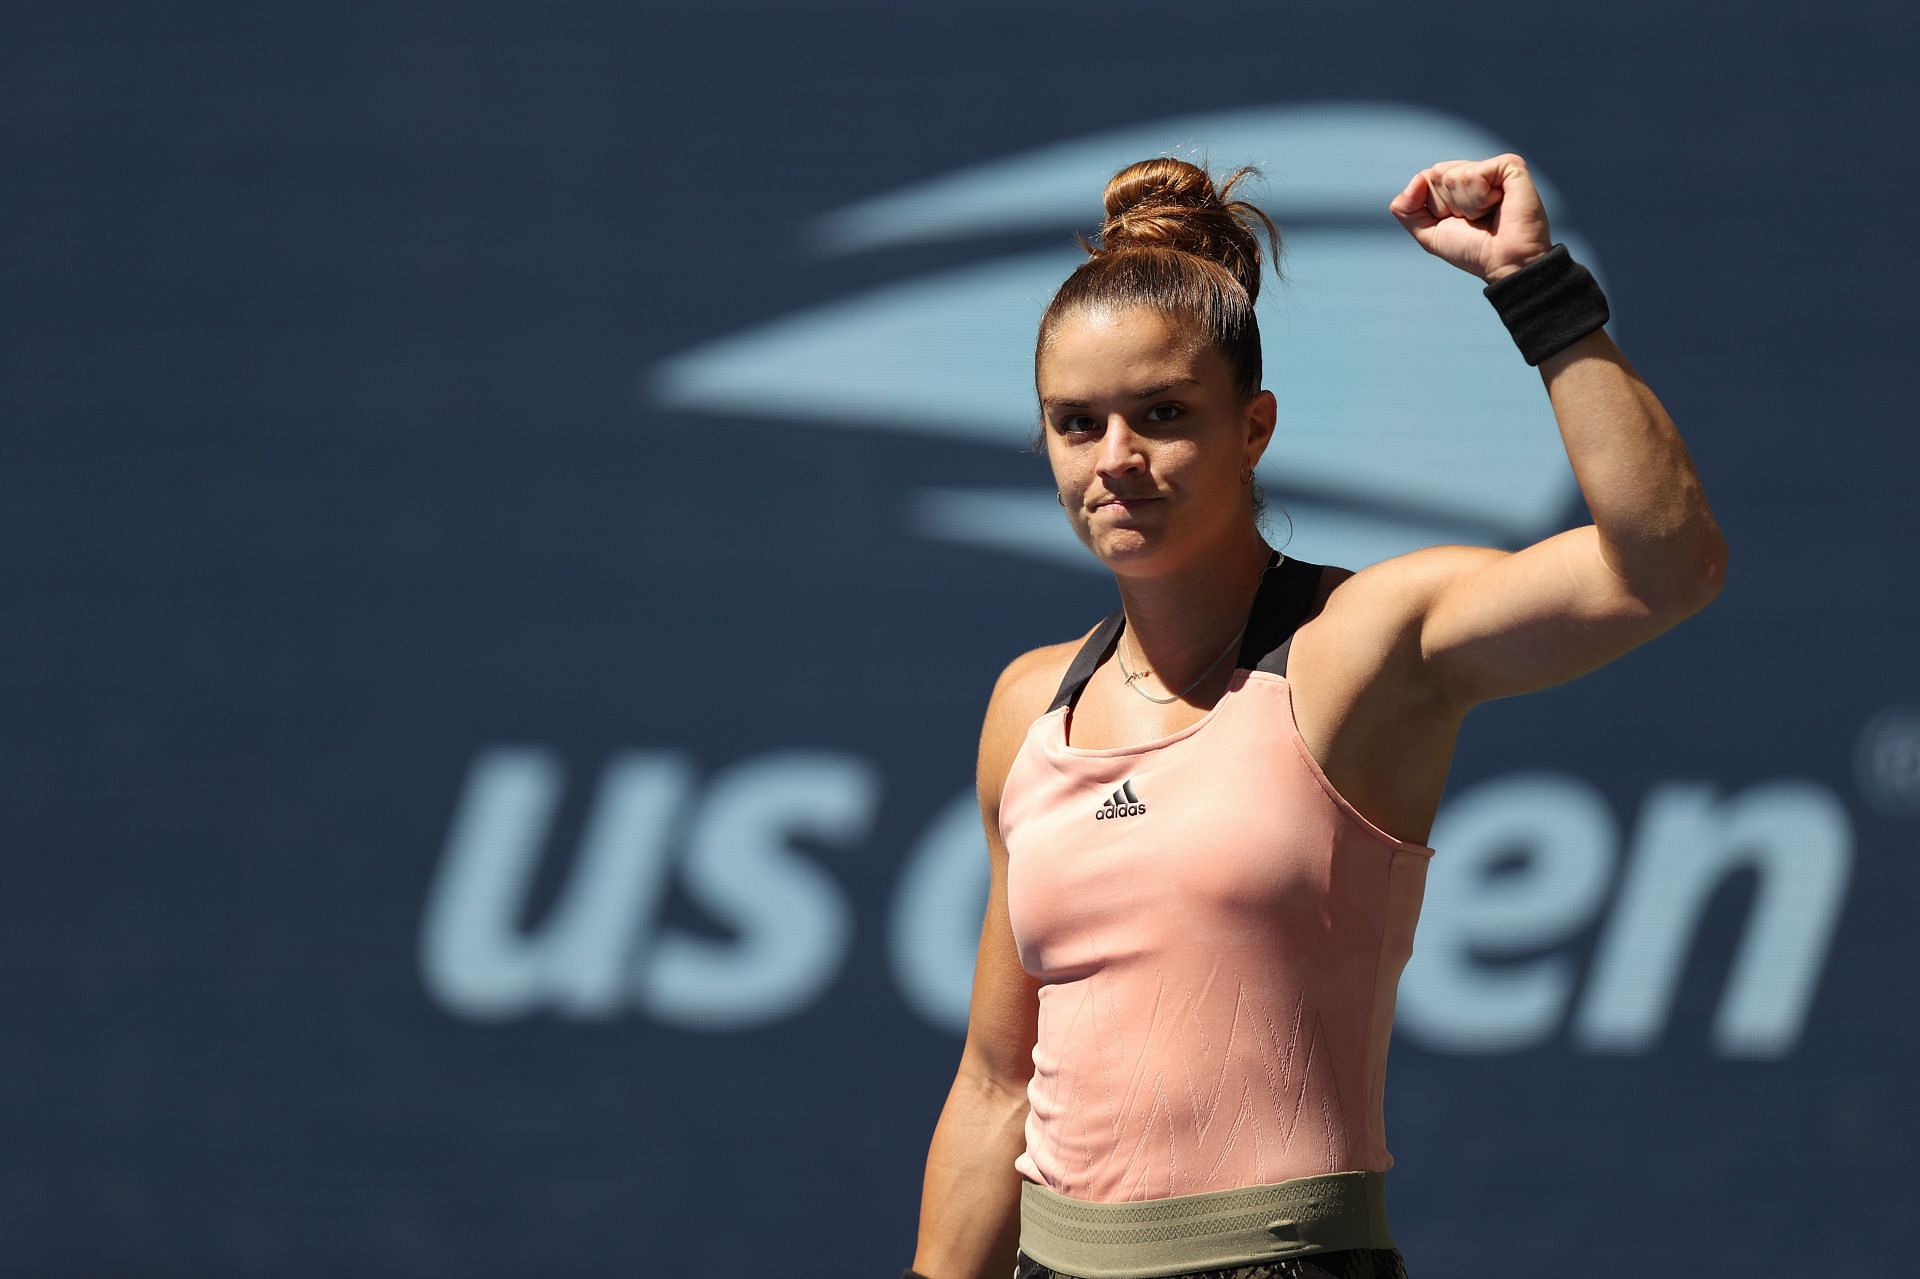 Maria Sakkari will take on Tatjana Maria for the third time in 2022 at the US Open